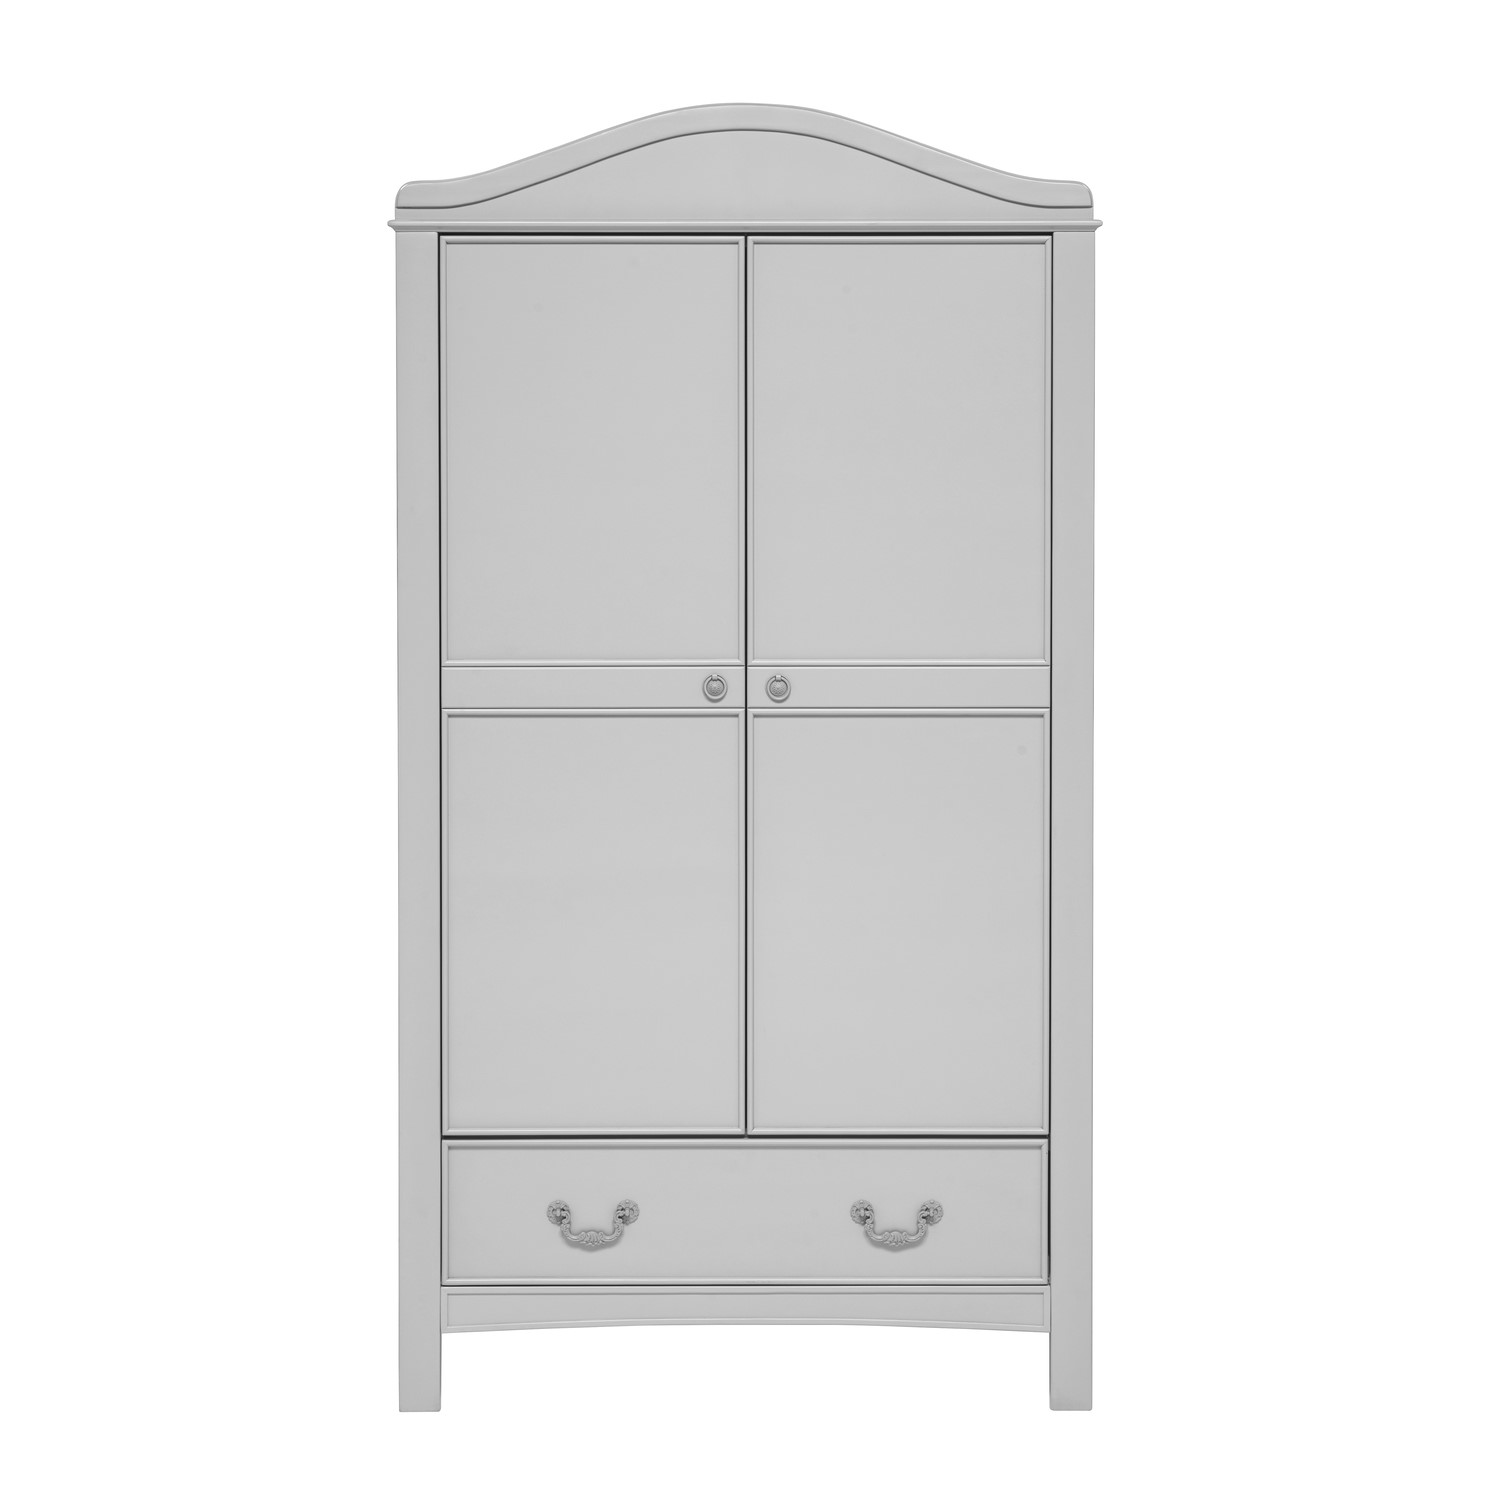 Photo of Nursery wardrobe with drawer in grey - toulouse - east coast